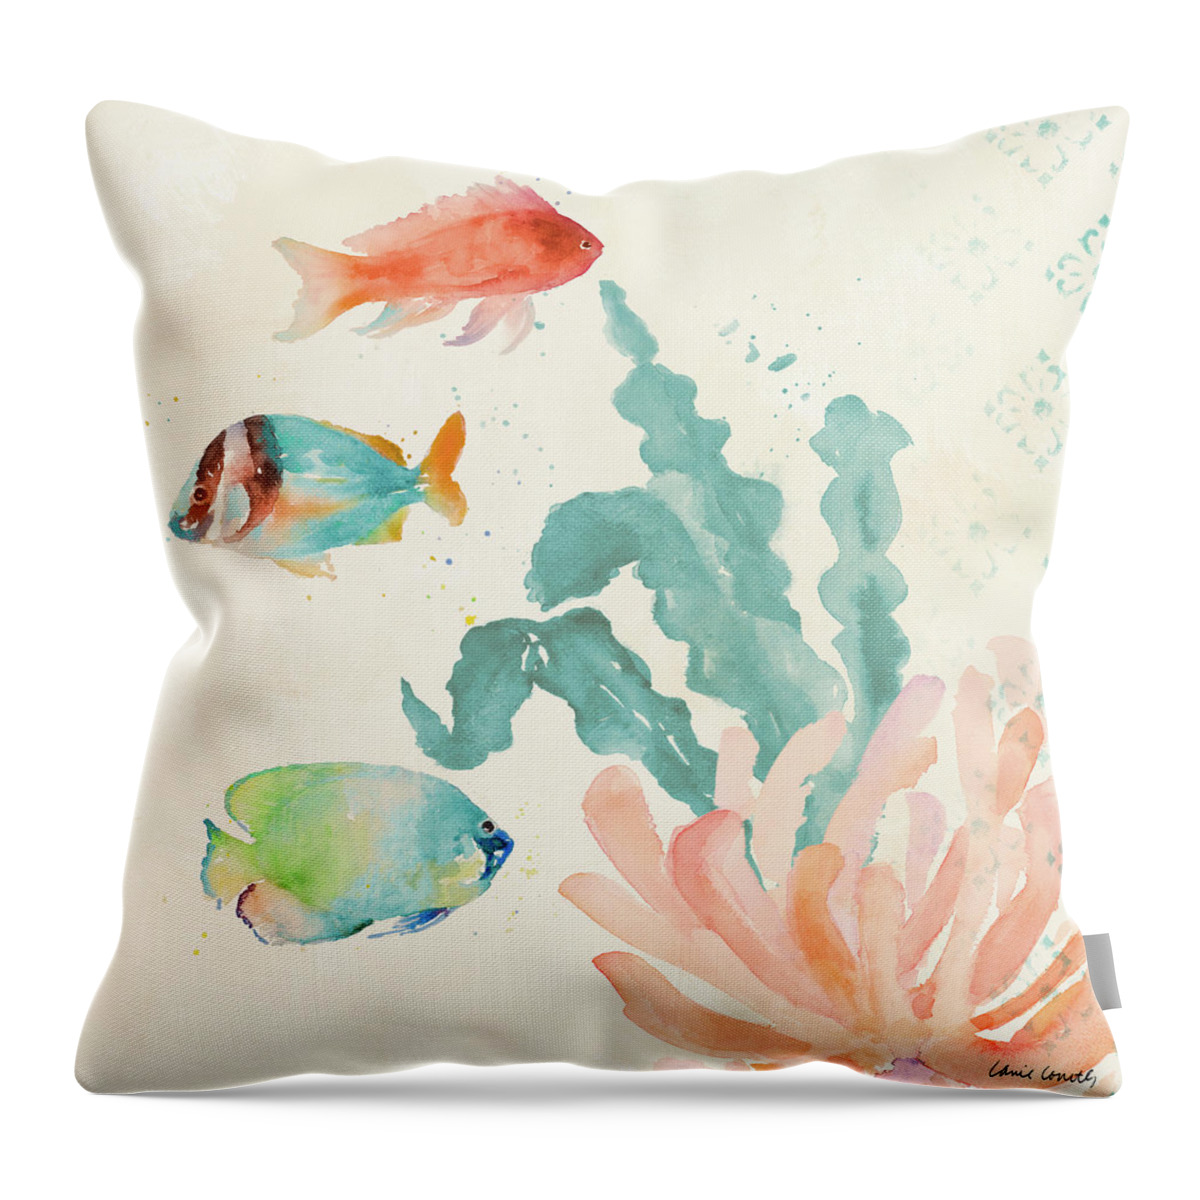 Tropical Throw Pillow featuring the painting Tropical Teal Coral Medley I by Lanie Loreth